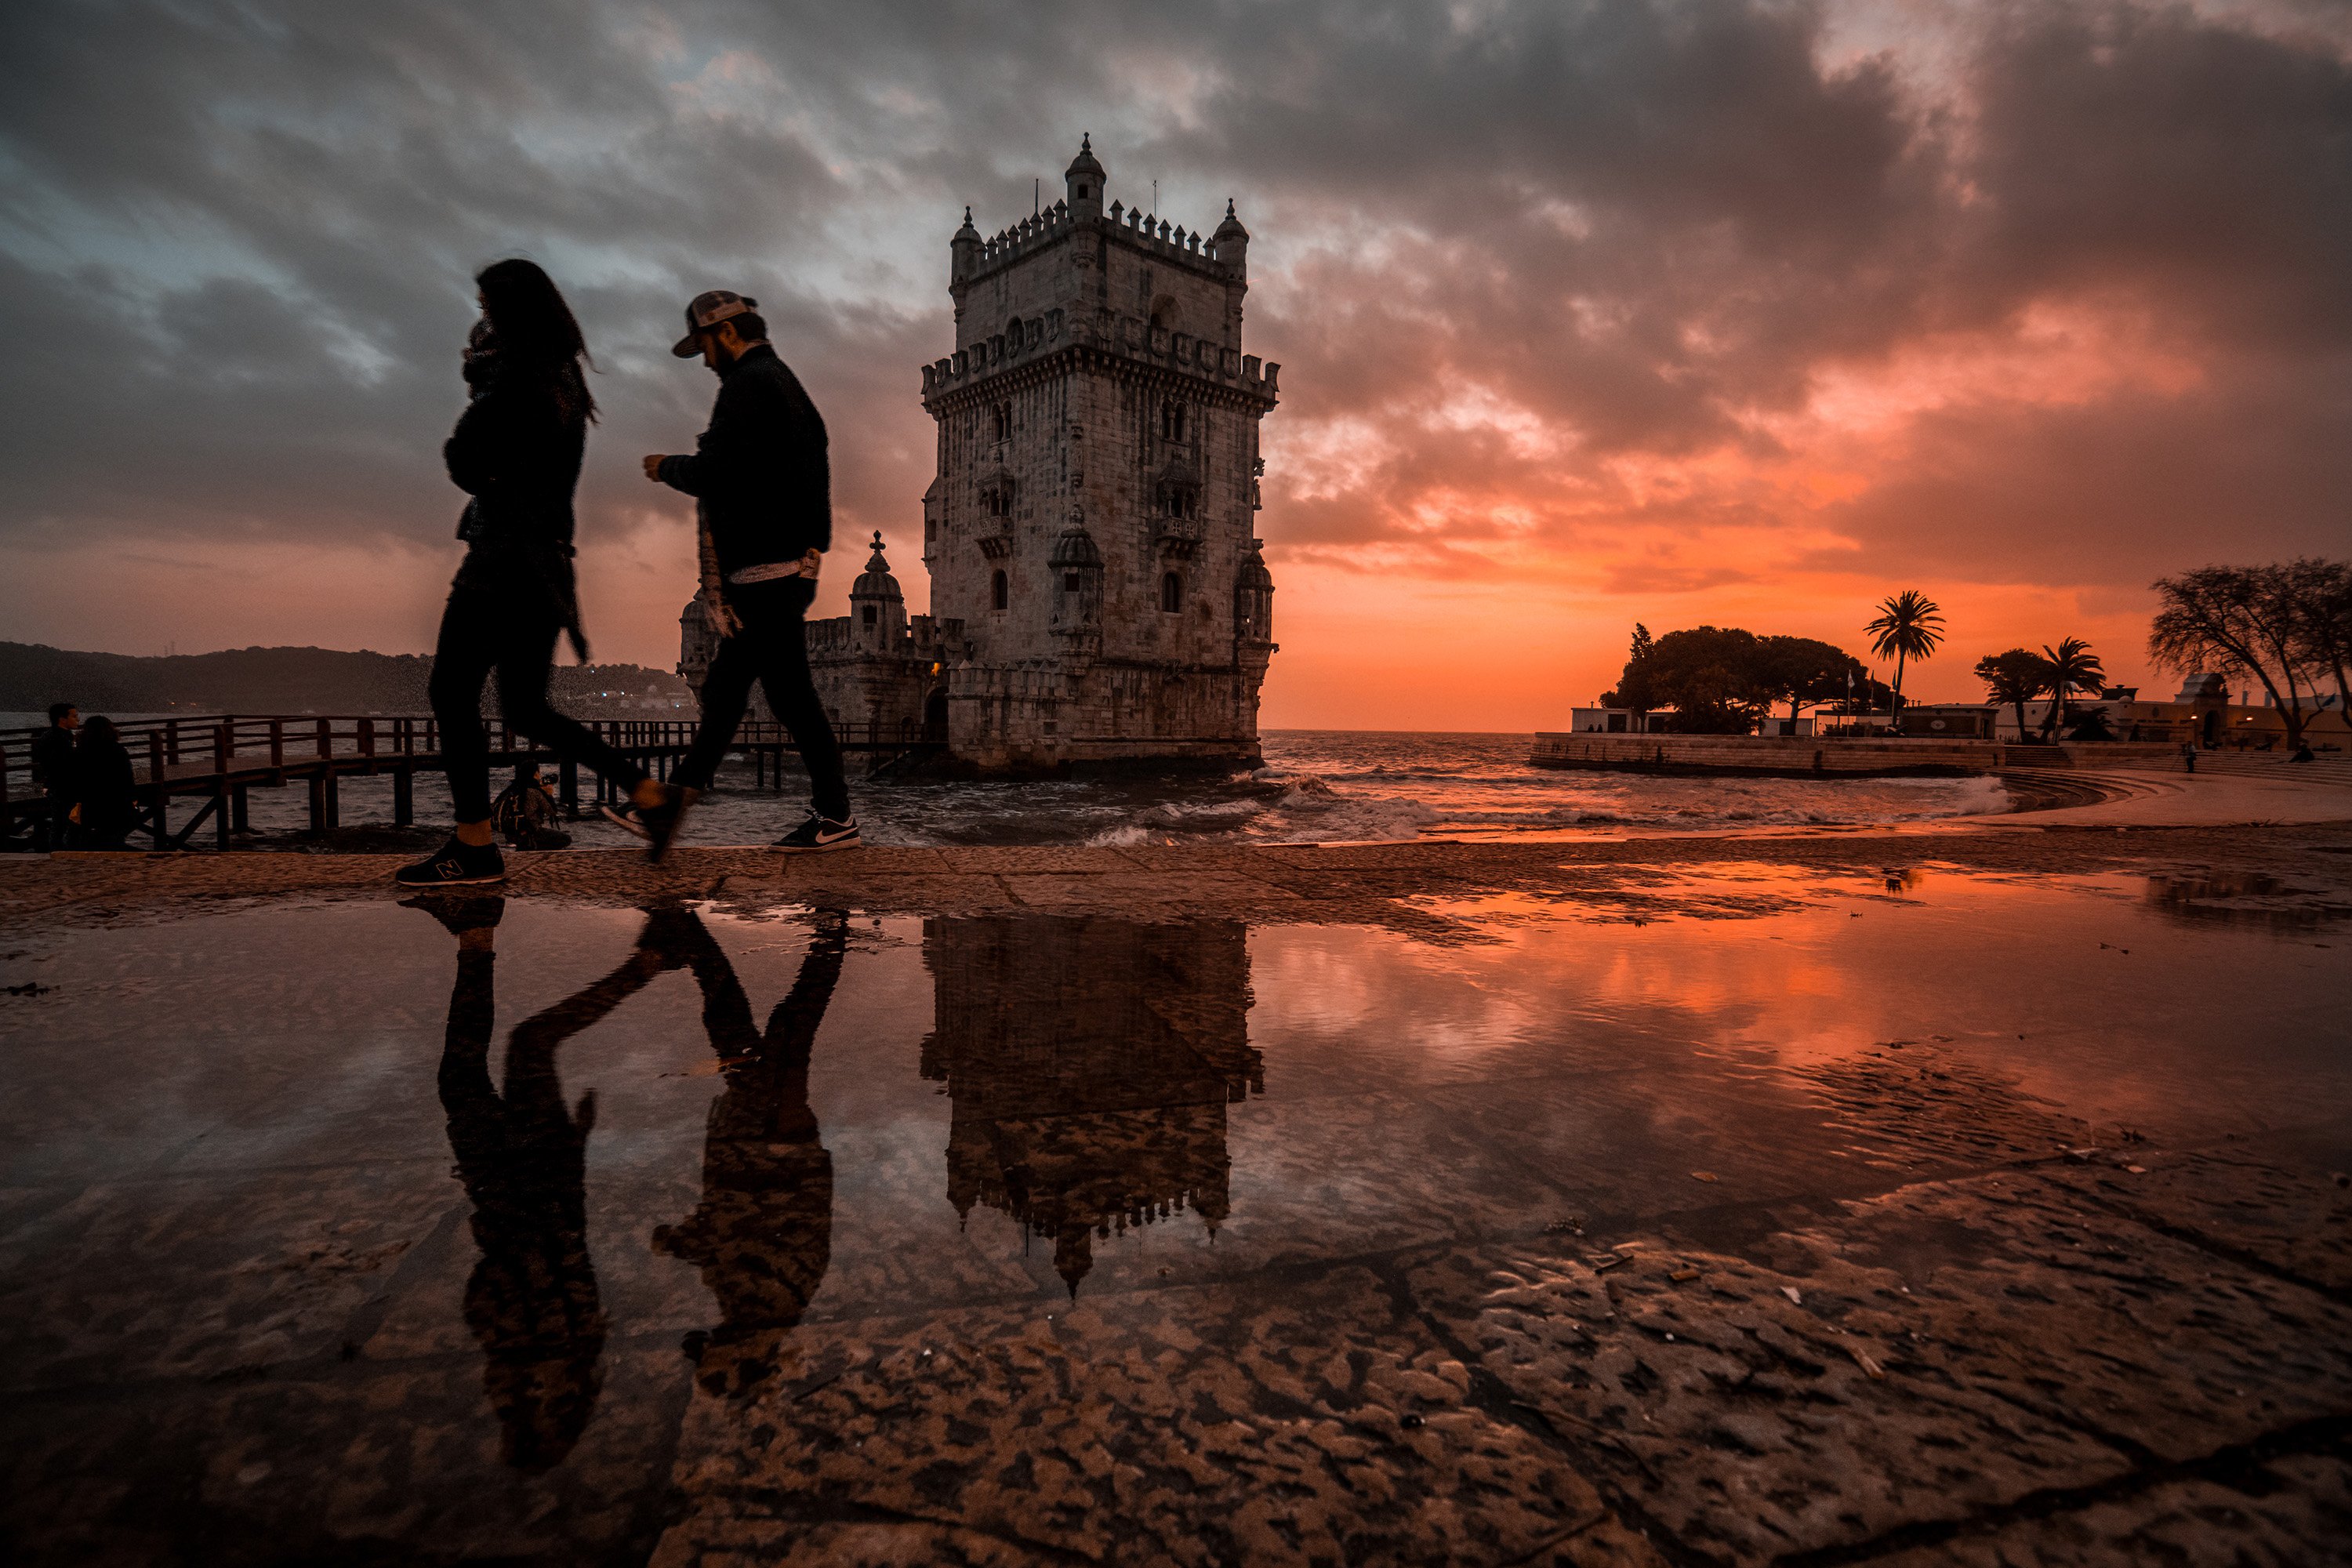 street, streetphotography, sunset, monument, people, orange, clouds, cloudscape, reflections, Antonio Coelho